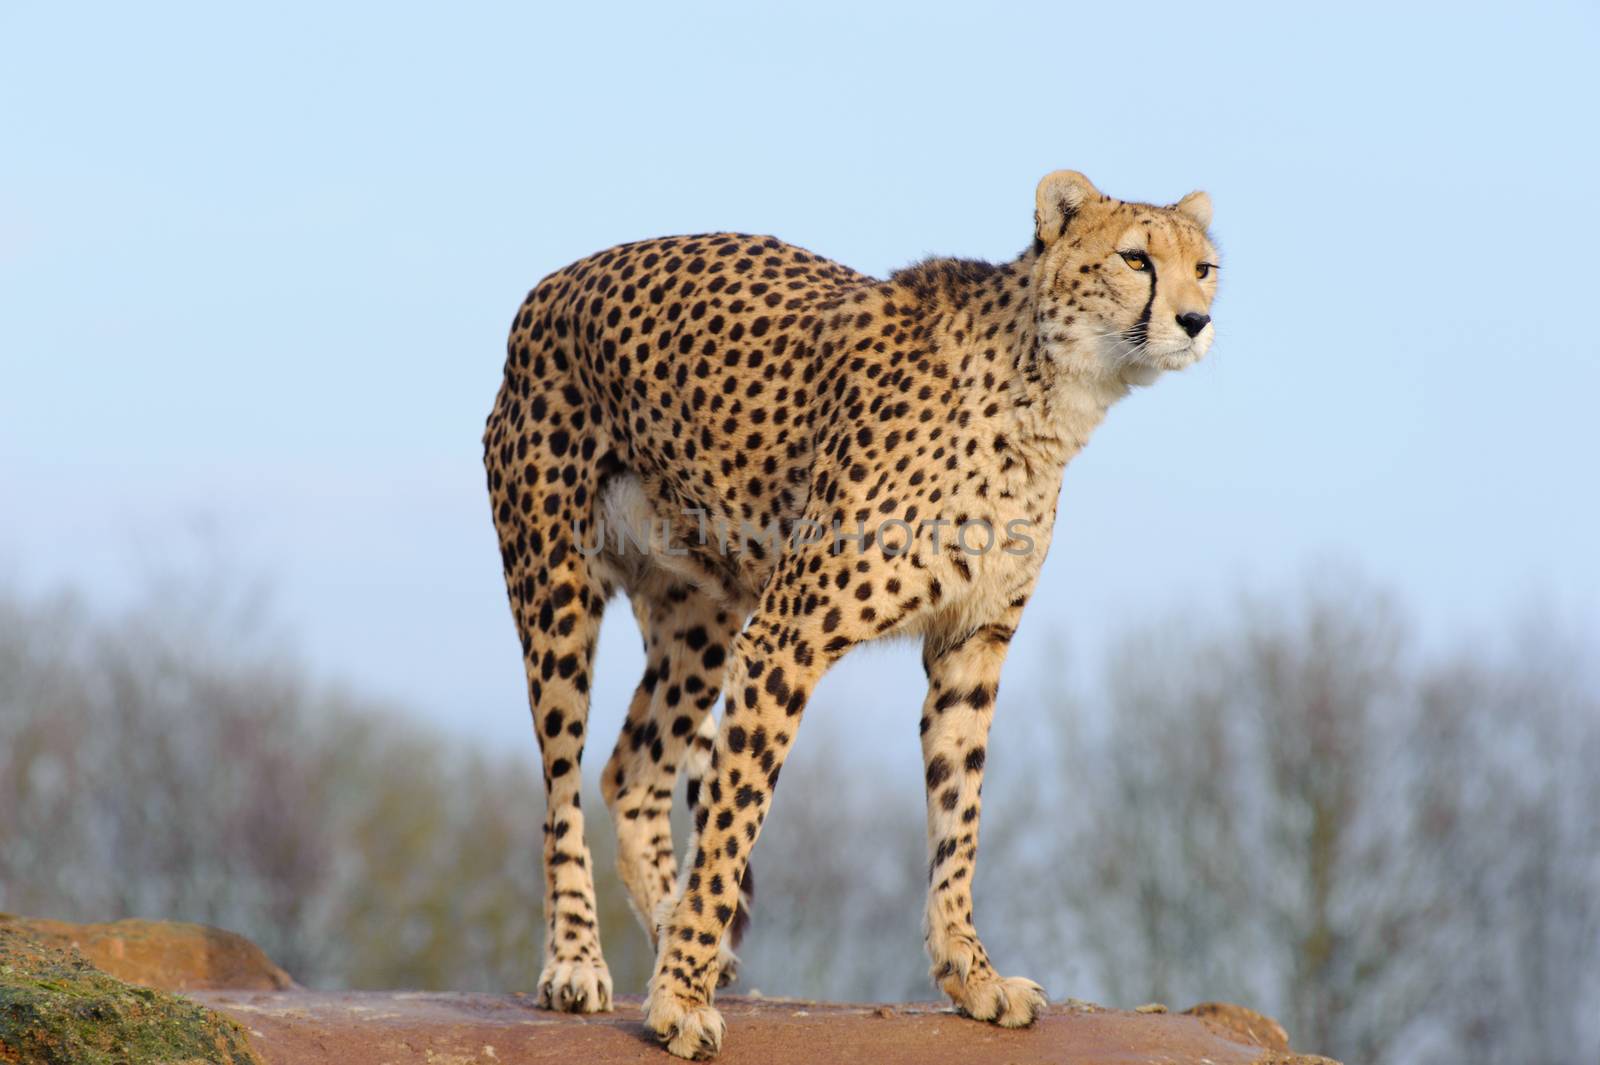 Cheetah ready to pounce by kmwphotography